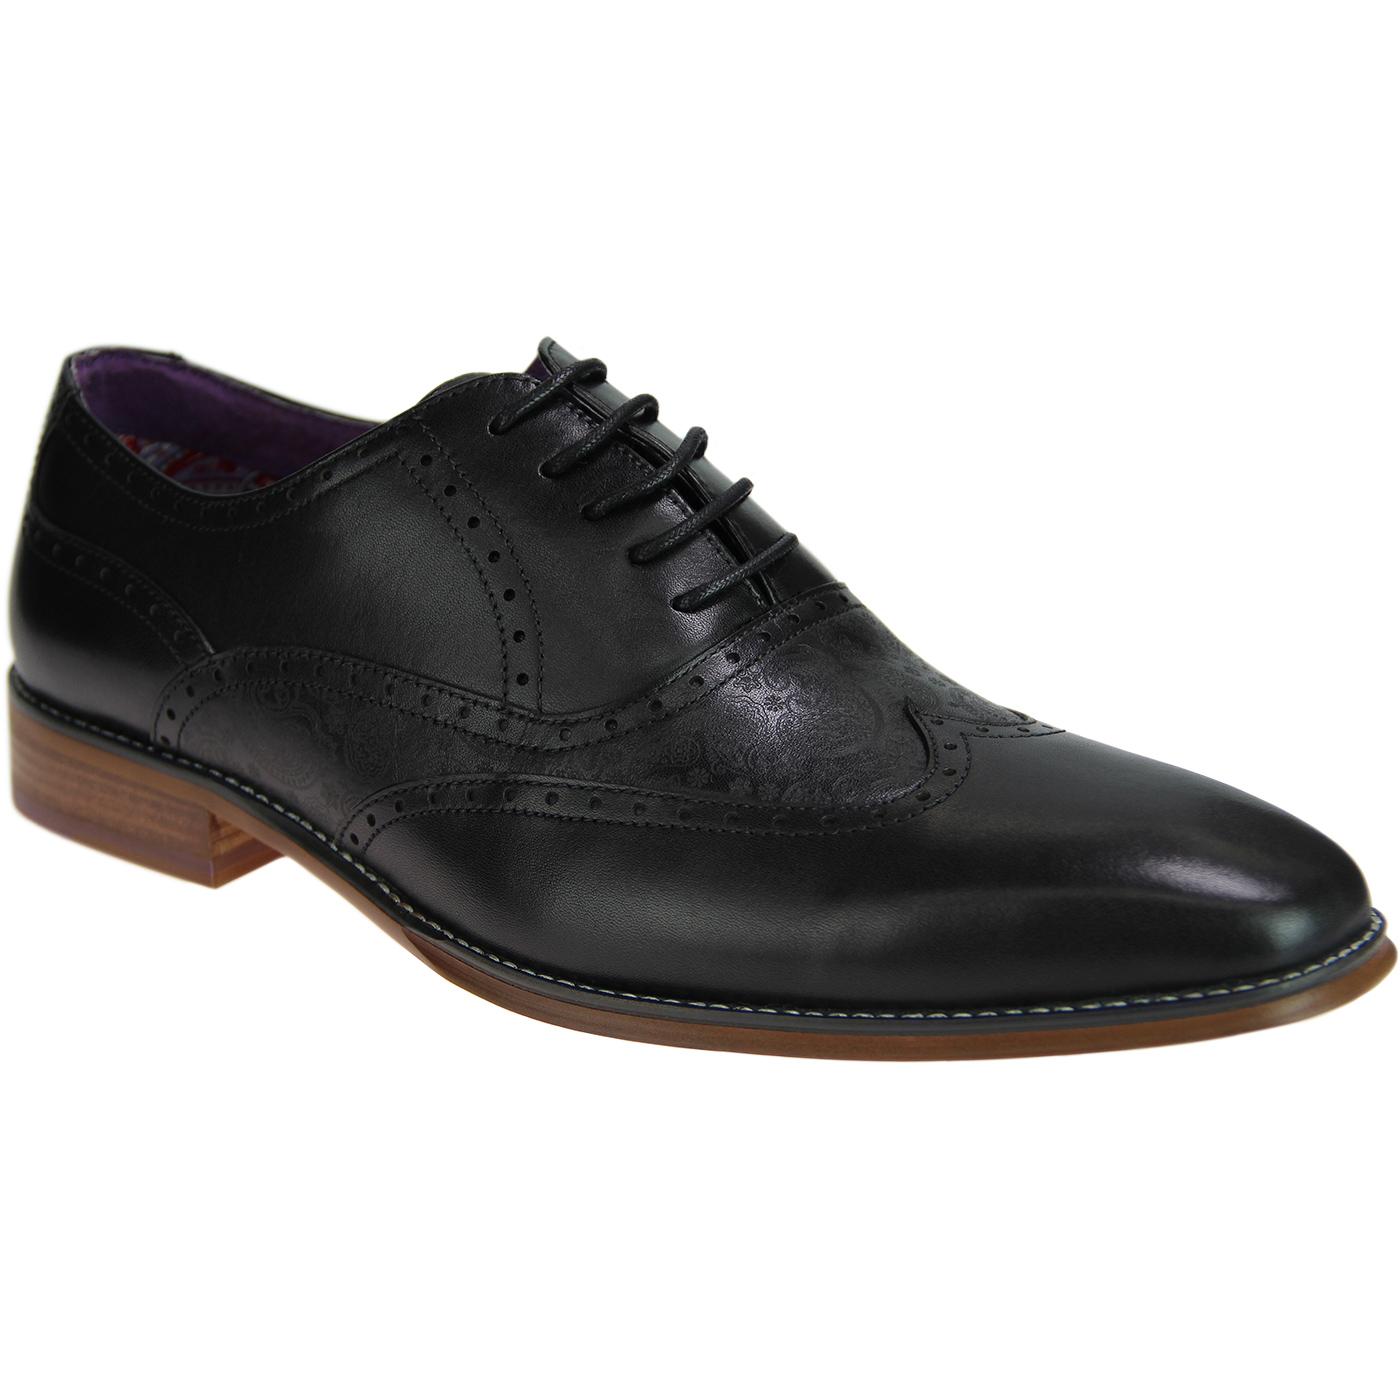 PAOLO VANDINI 'Daxon' Mod 60's Paisley Oxford shoes in Black